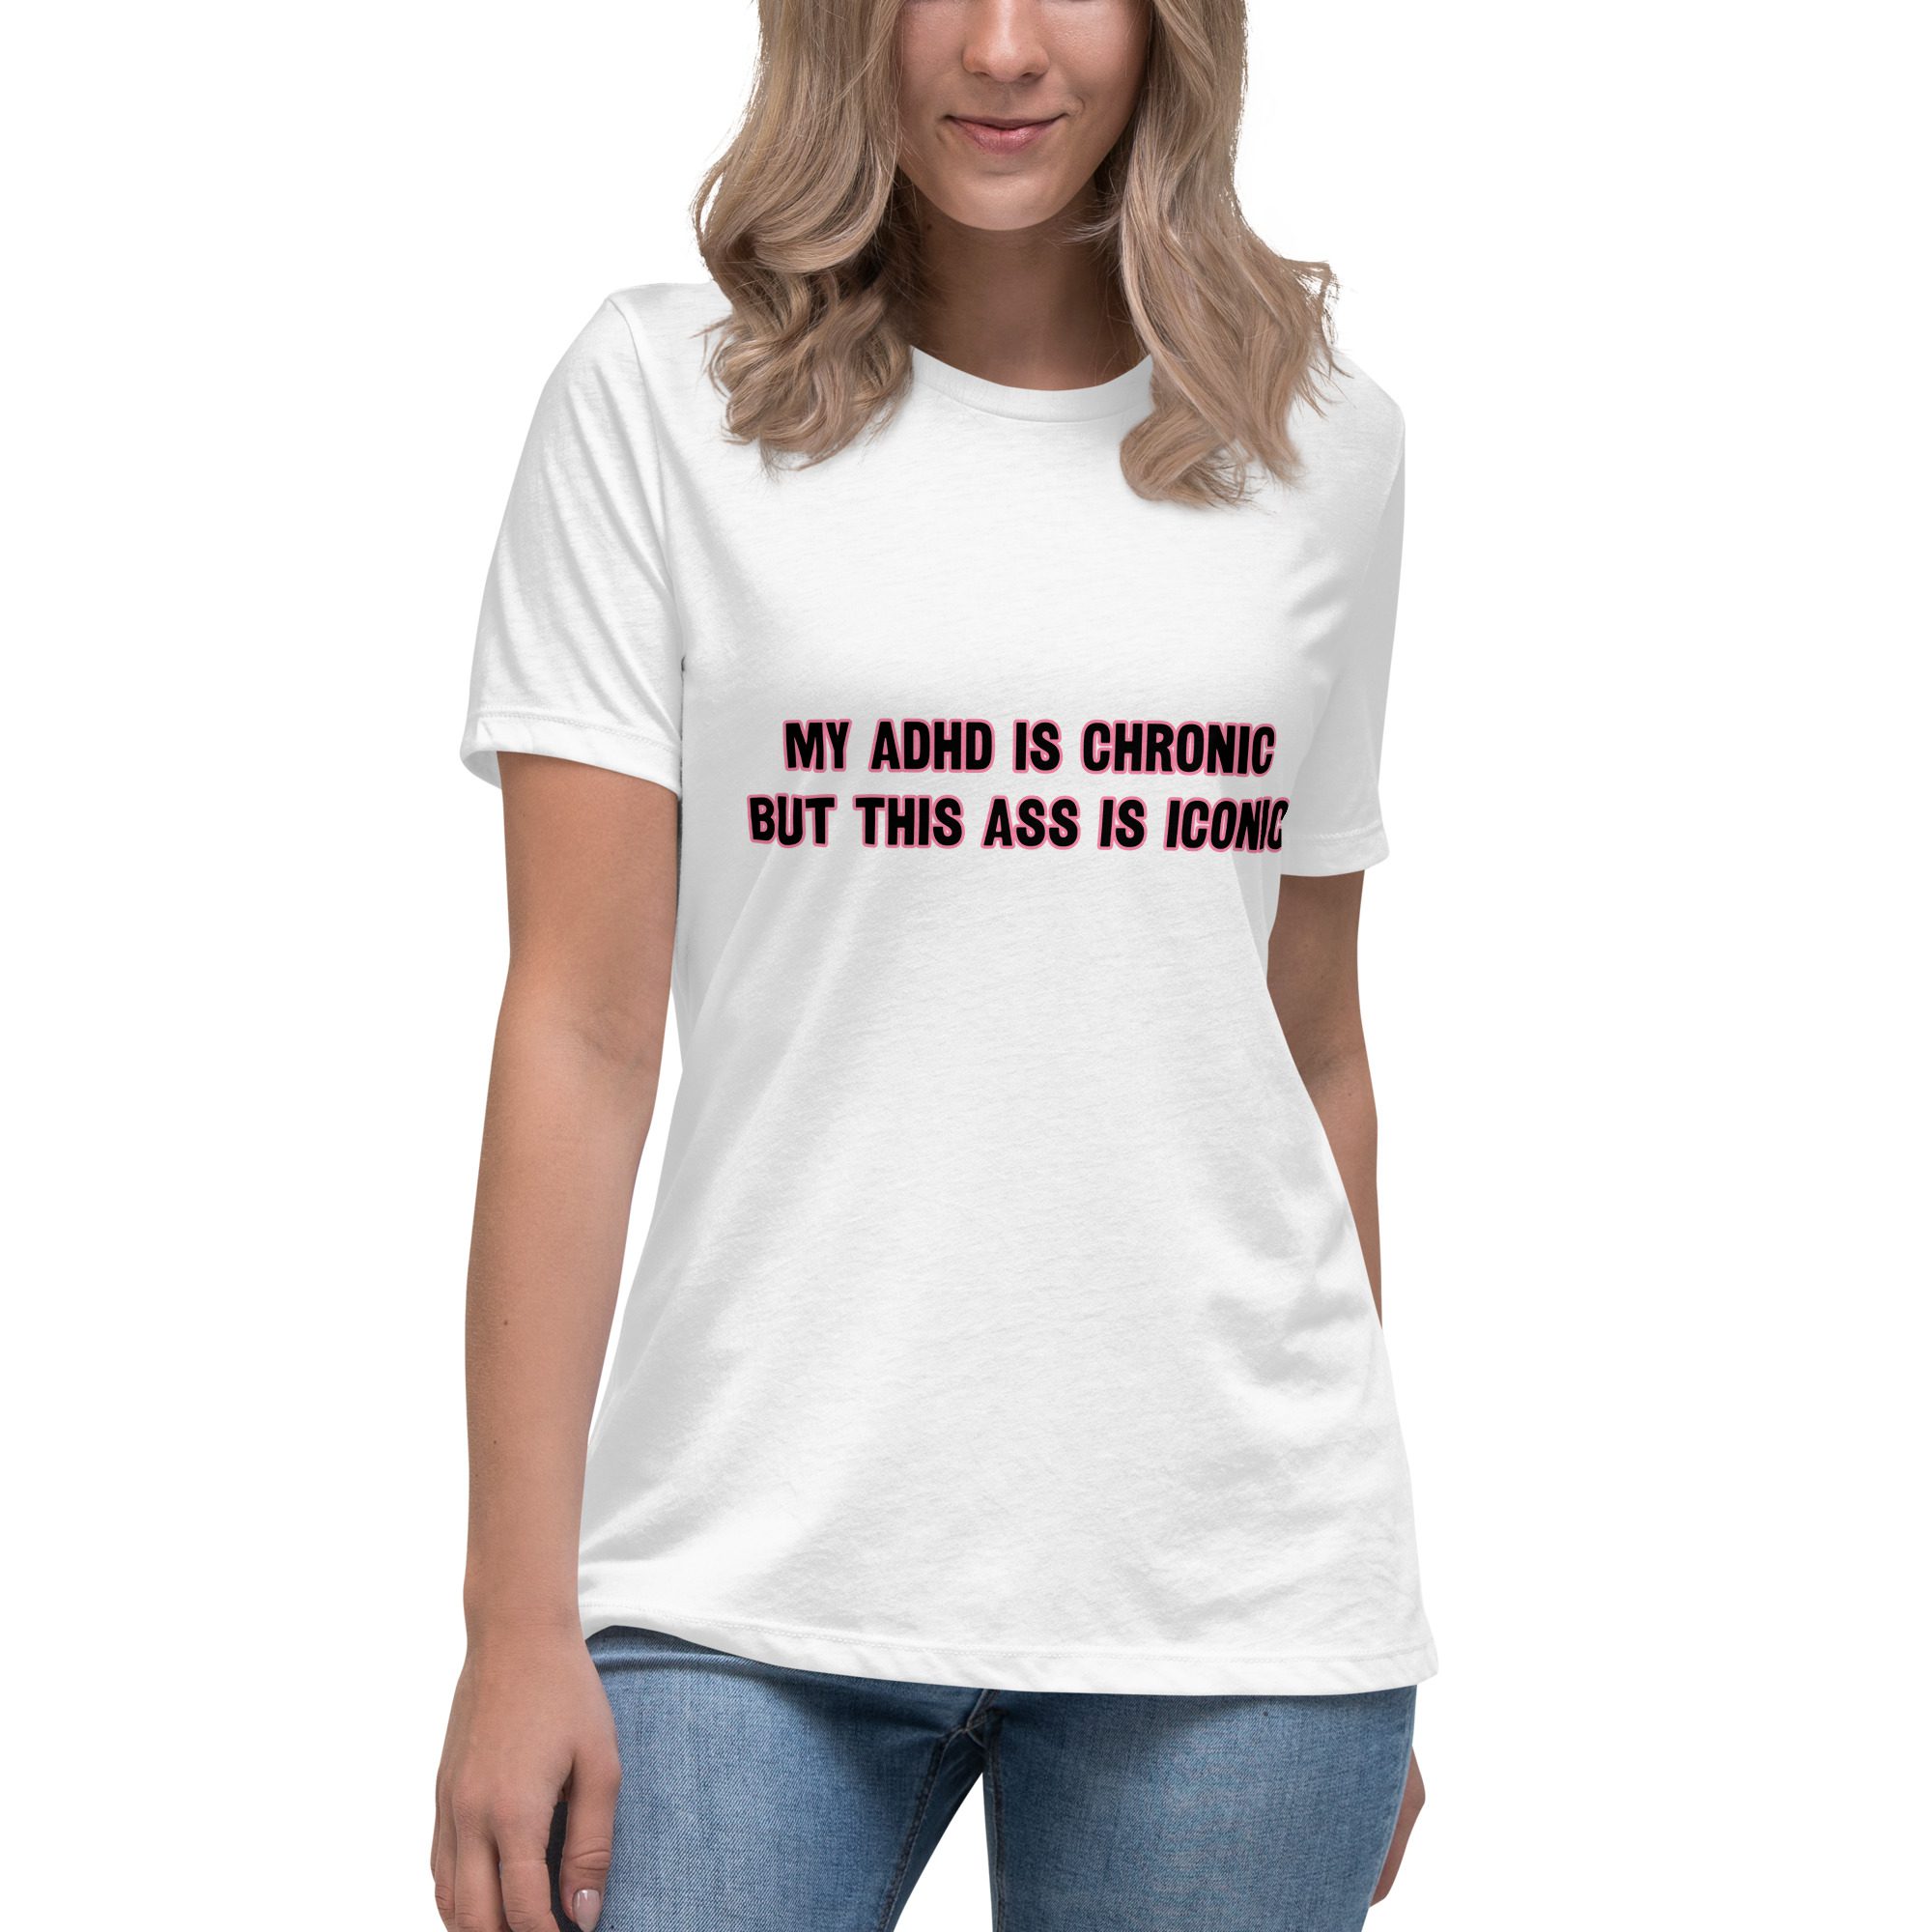 My ADHD Is Chronic But This Ass Is Iconic Women's T-Shirt